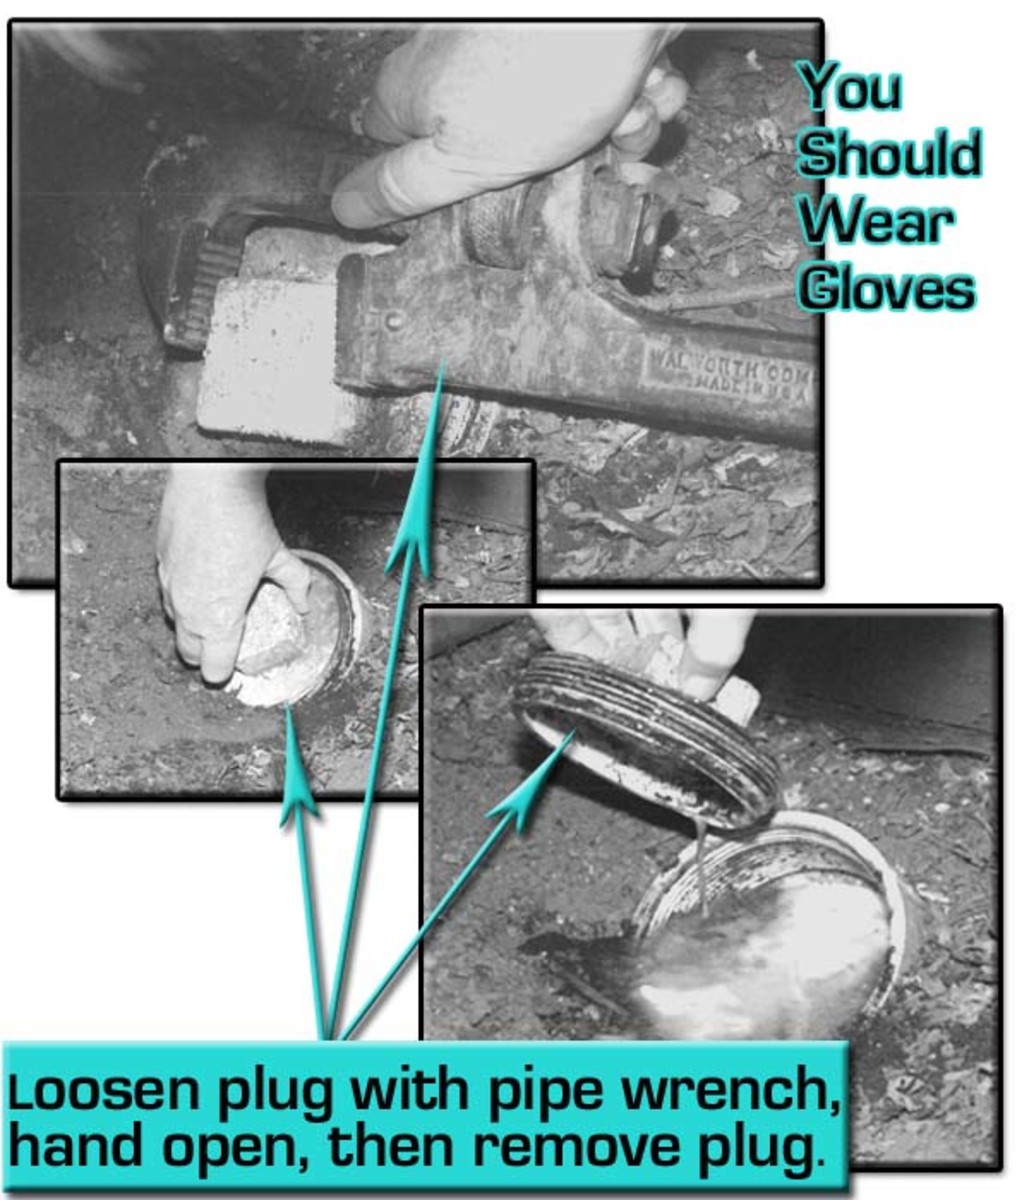 Loosen the plug with wrench, hand unscrew plug, remove plug. WEAR GLOVES!